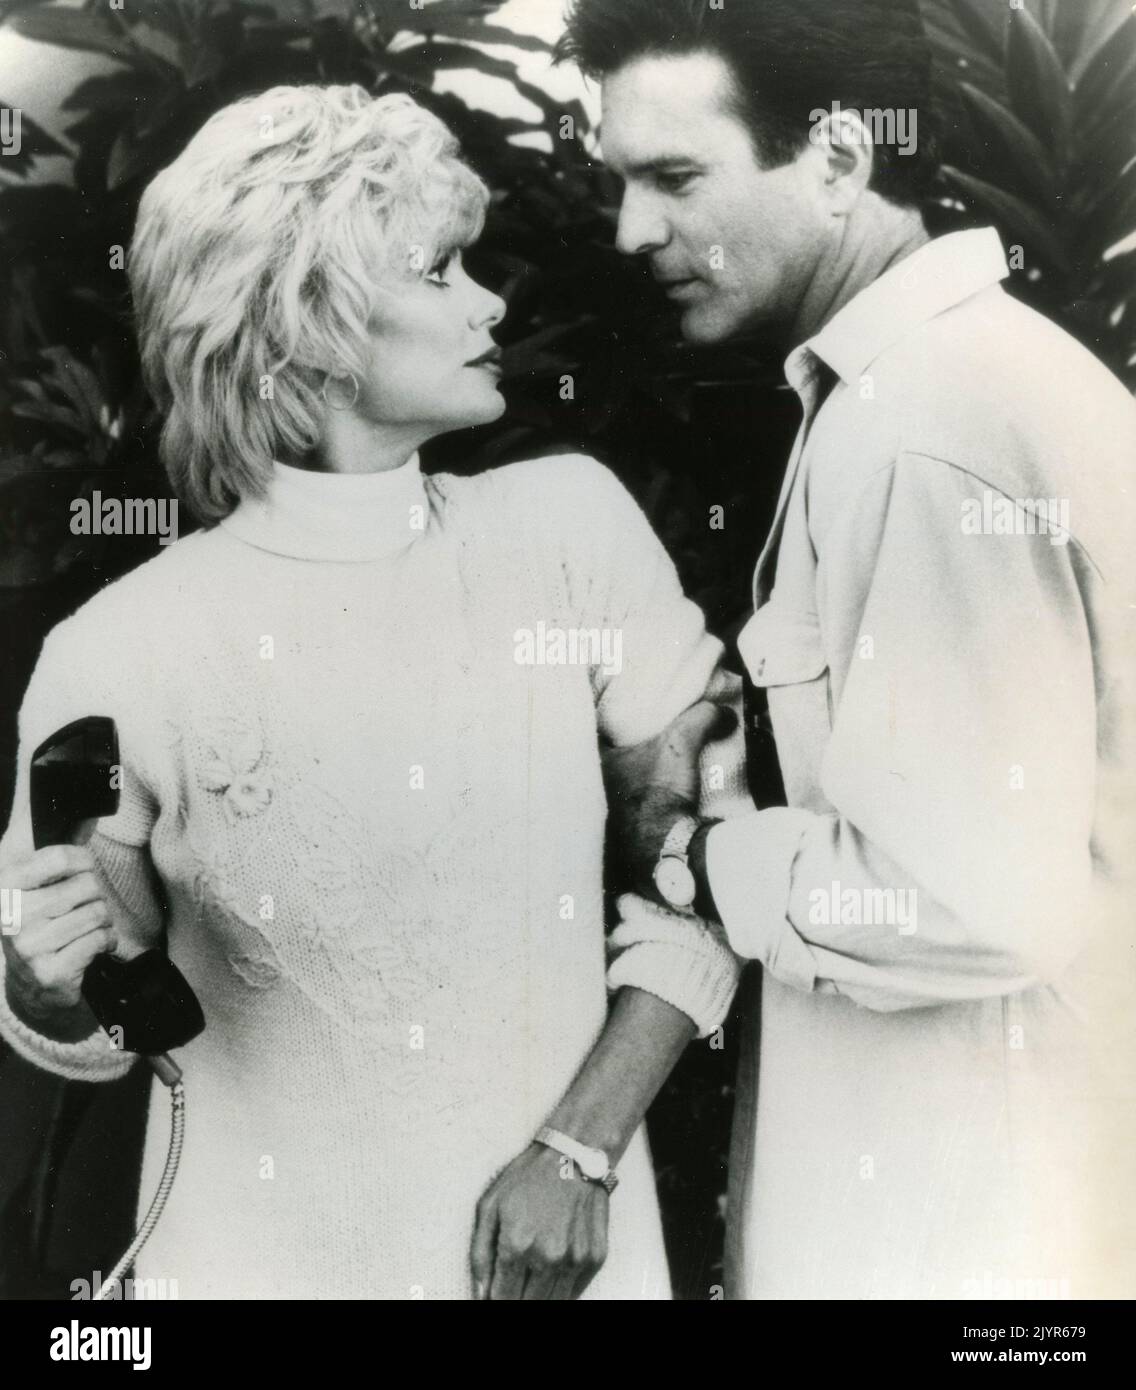 Actress Loni Anderson and actor Anthony John Denison in the movie Plan of Attack, USA 1992 Stock Photo